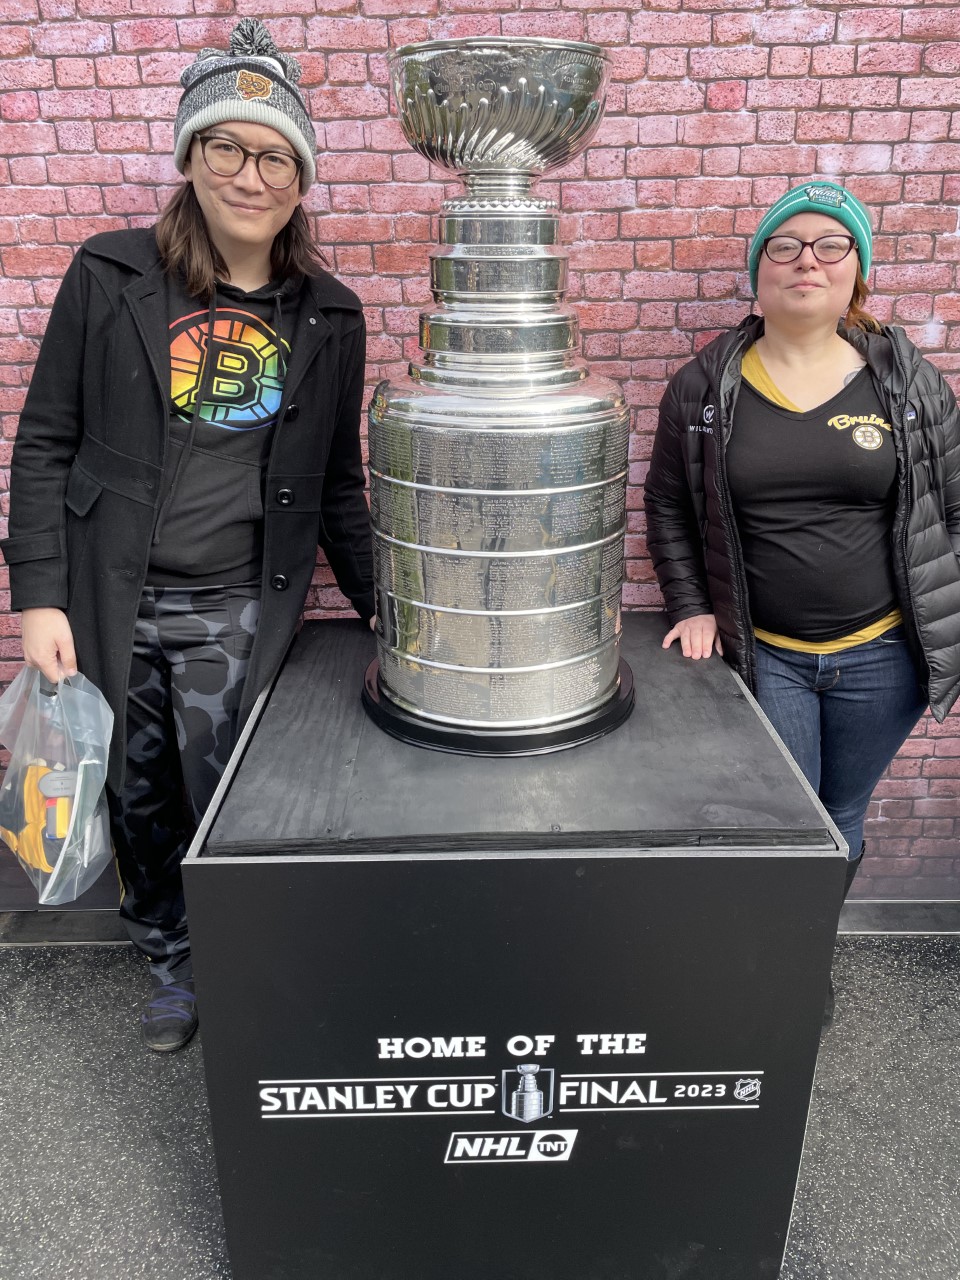 Christine and I standing next to the Stanley Cup